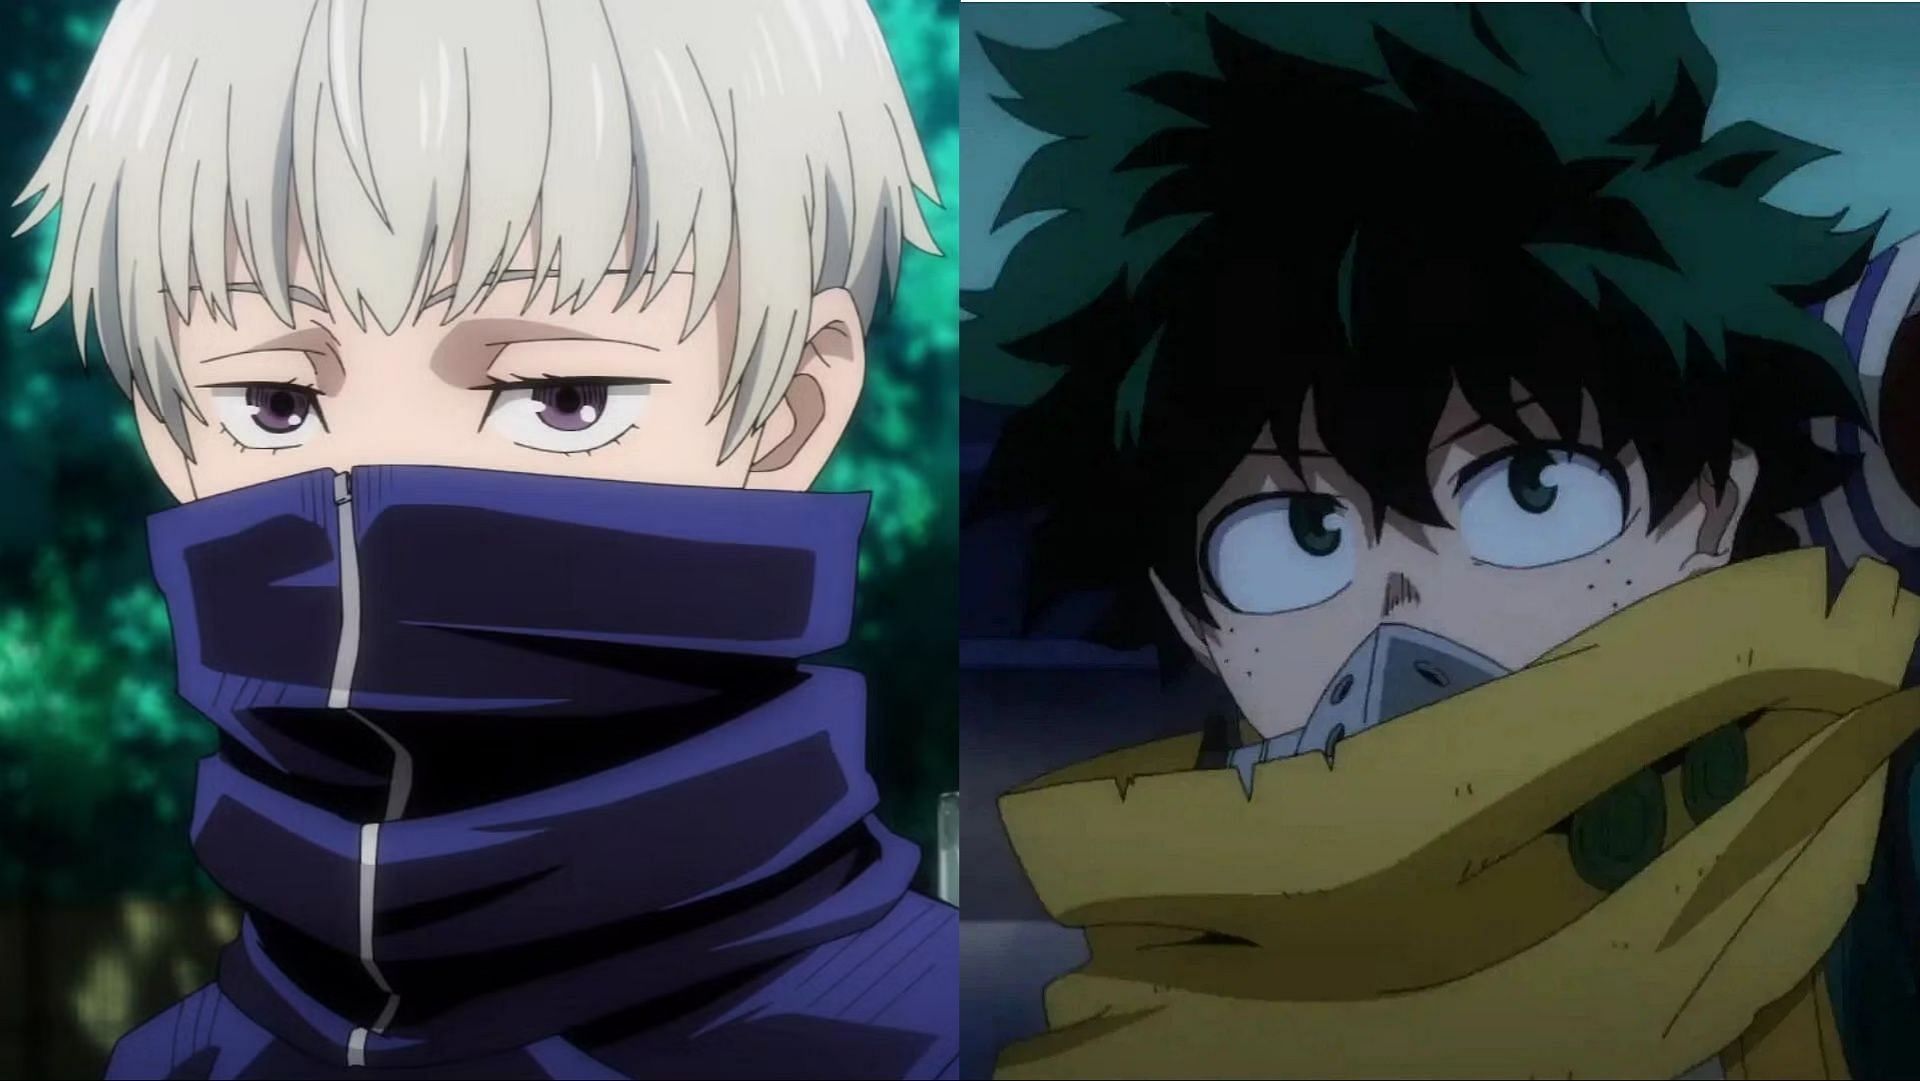 Fans compare Deku to Inumaki after My Hero Academia chapter 419 spoilers drop (Image via Bones and MAPPA)